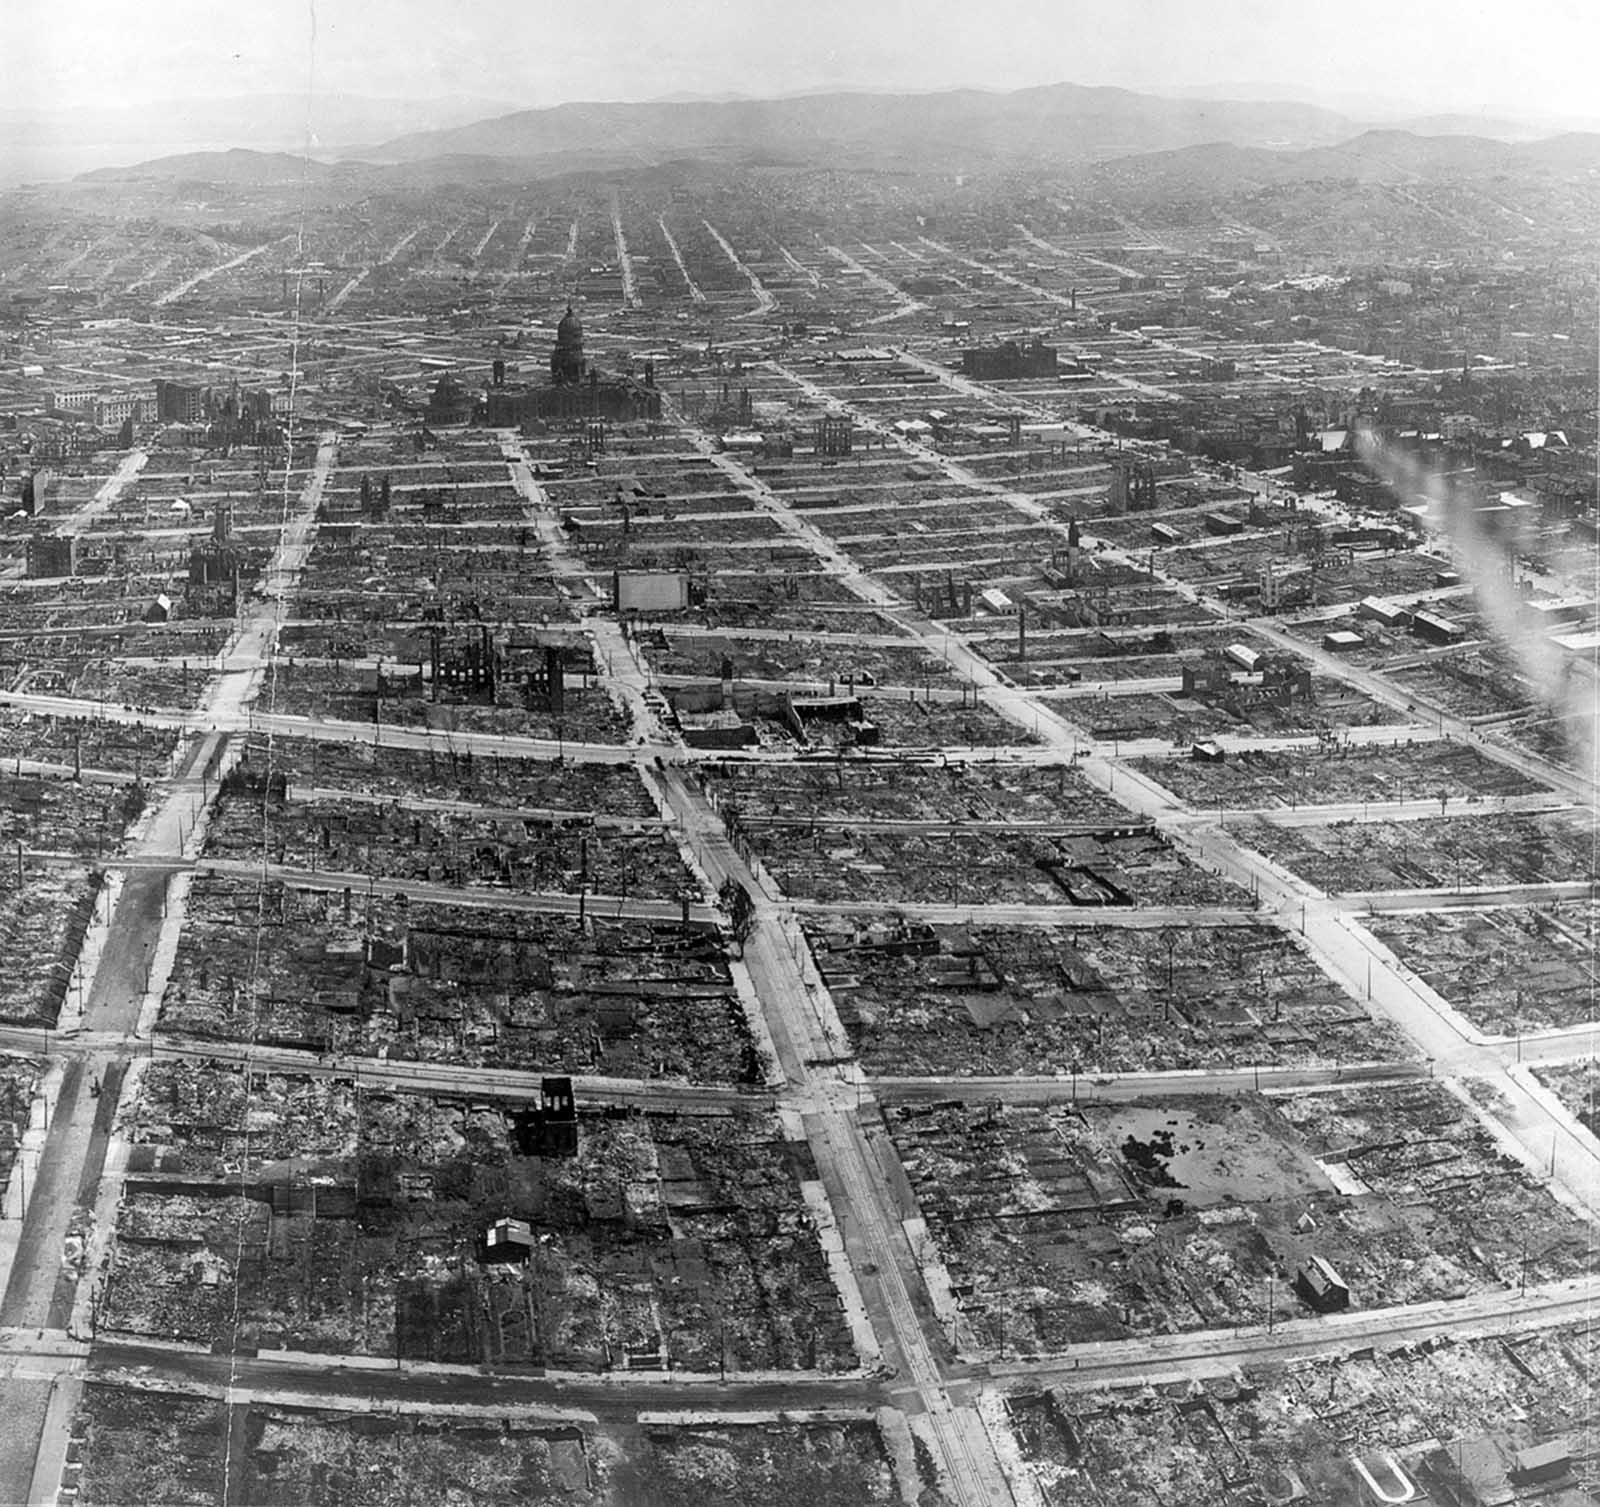 Detail of the panorama photograph of a ruined San Francisco, viewed from the Lawrence Captive Airship on May 29, 1906.